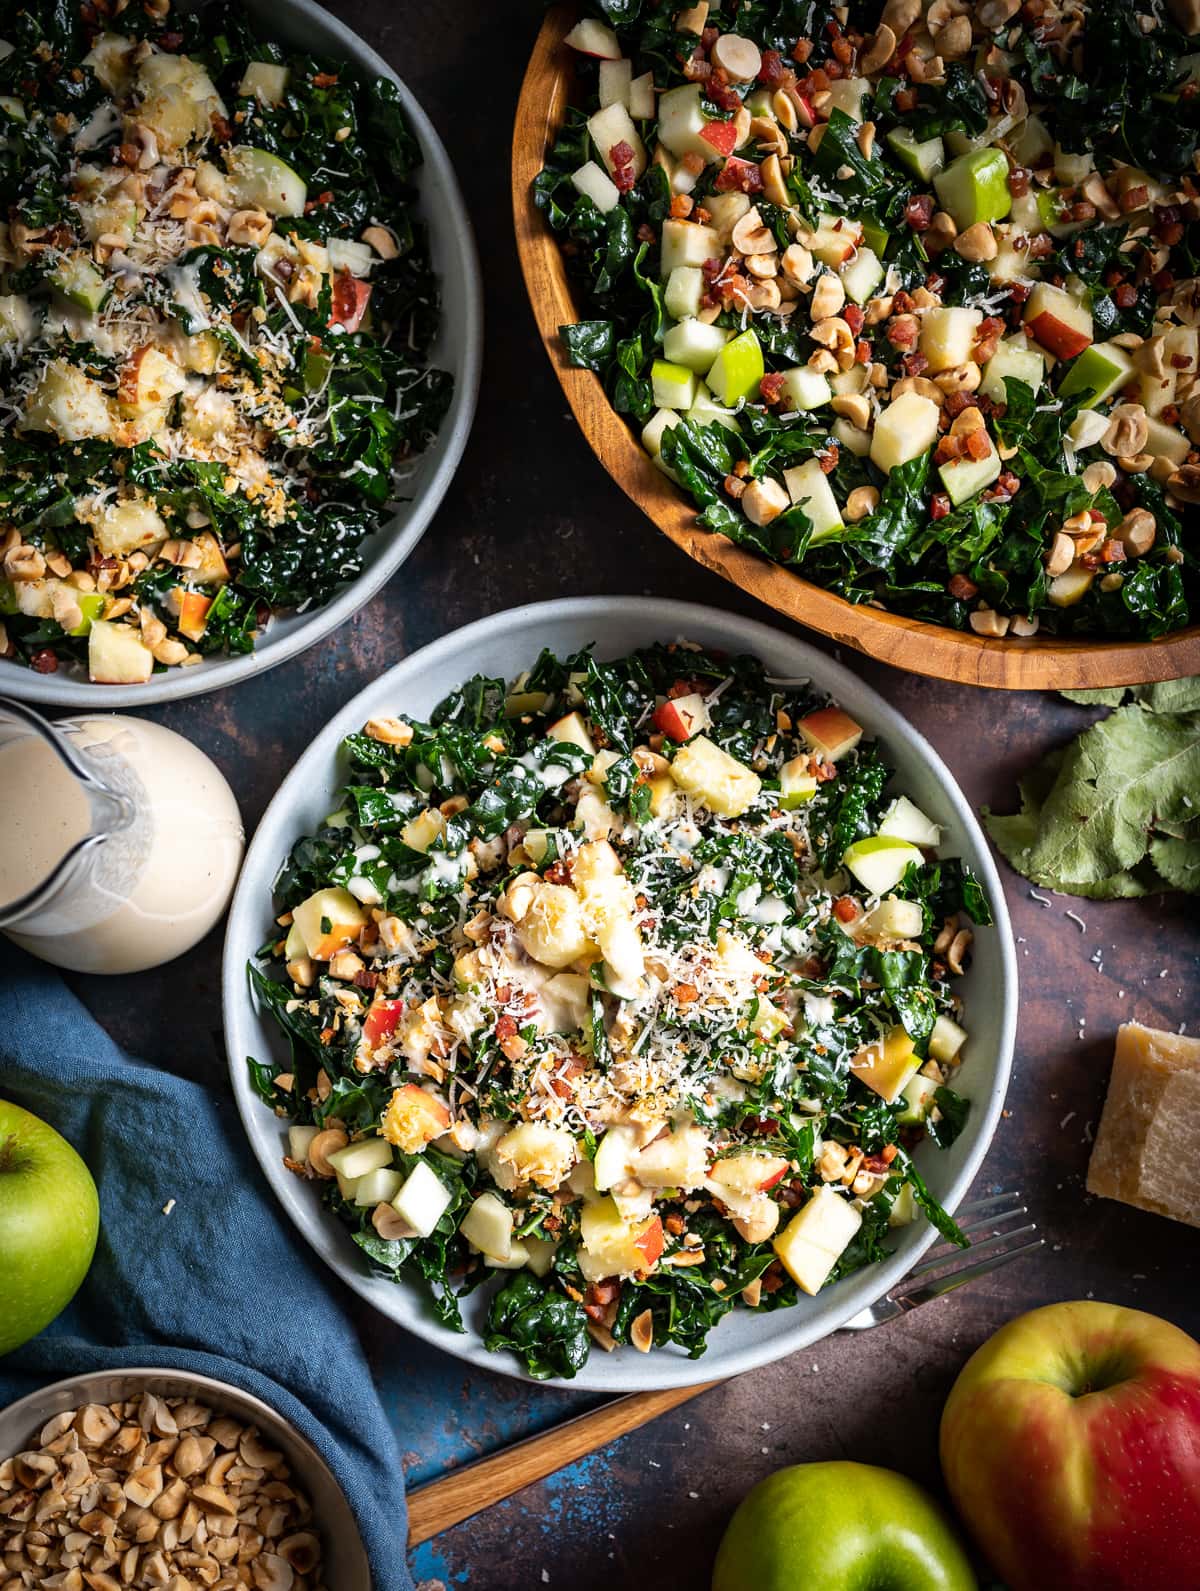 Chopped Kale Salad with Apples and Hazelnuts